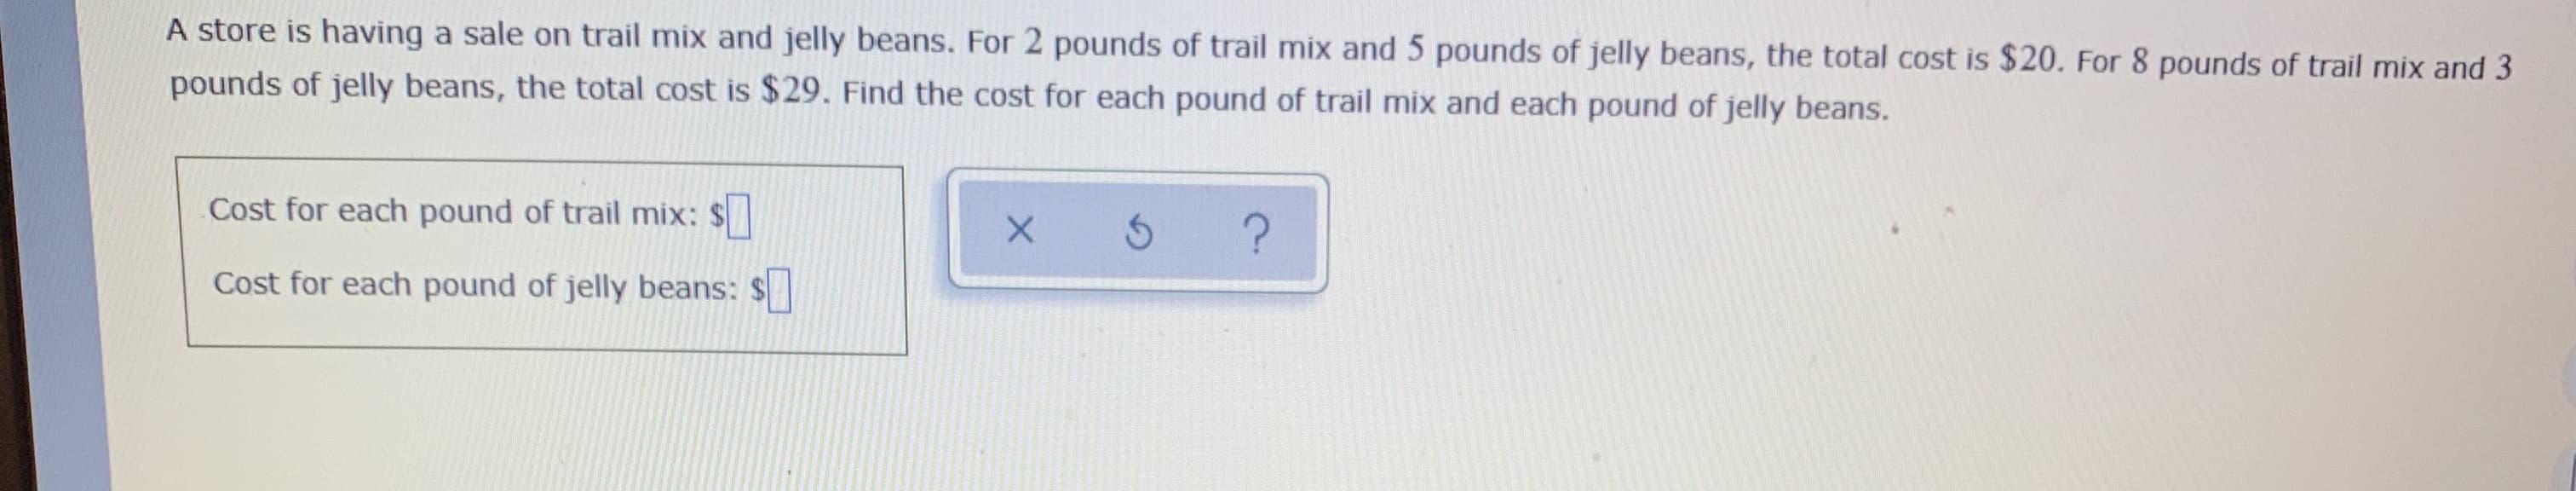 A store is having a sale on trail mix and jelly beans. For 2 pounds of trail mix and 5 pounds of jelly beans, the total cost is $20. For 8 pounds of trail mix and 3
pounds of jelly beans, the total cost is $29. Find the cost for each pound of trail mix and each pound of jelly beans.
